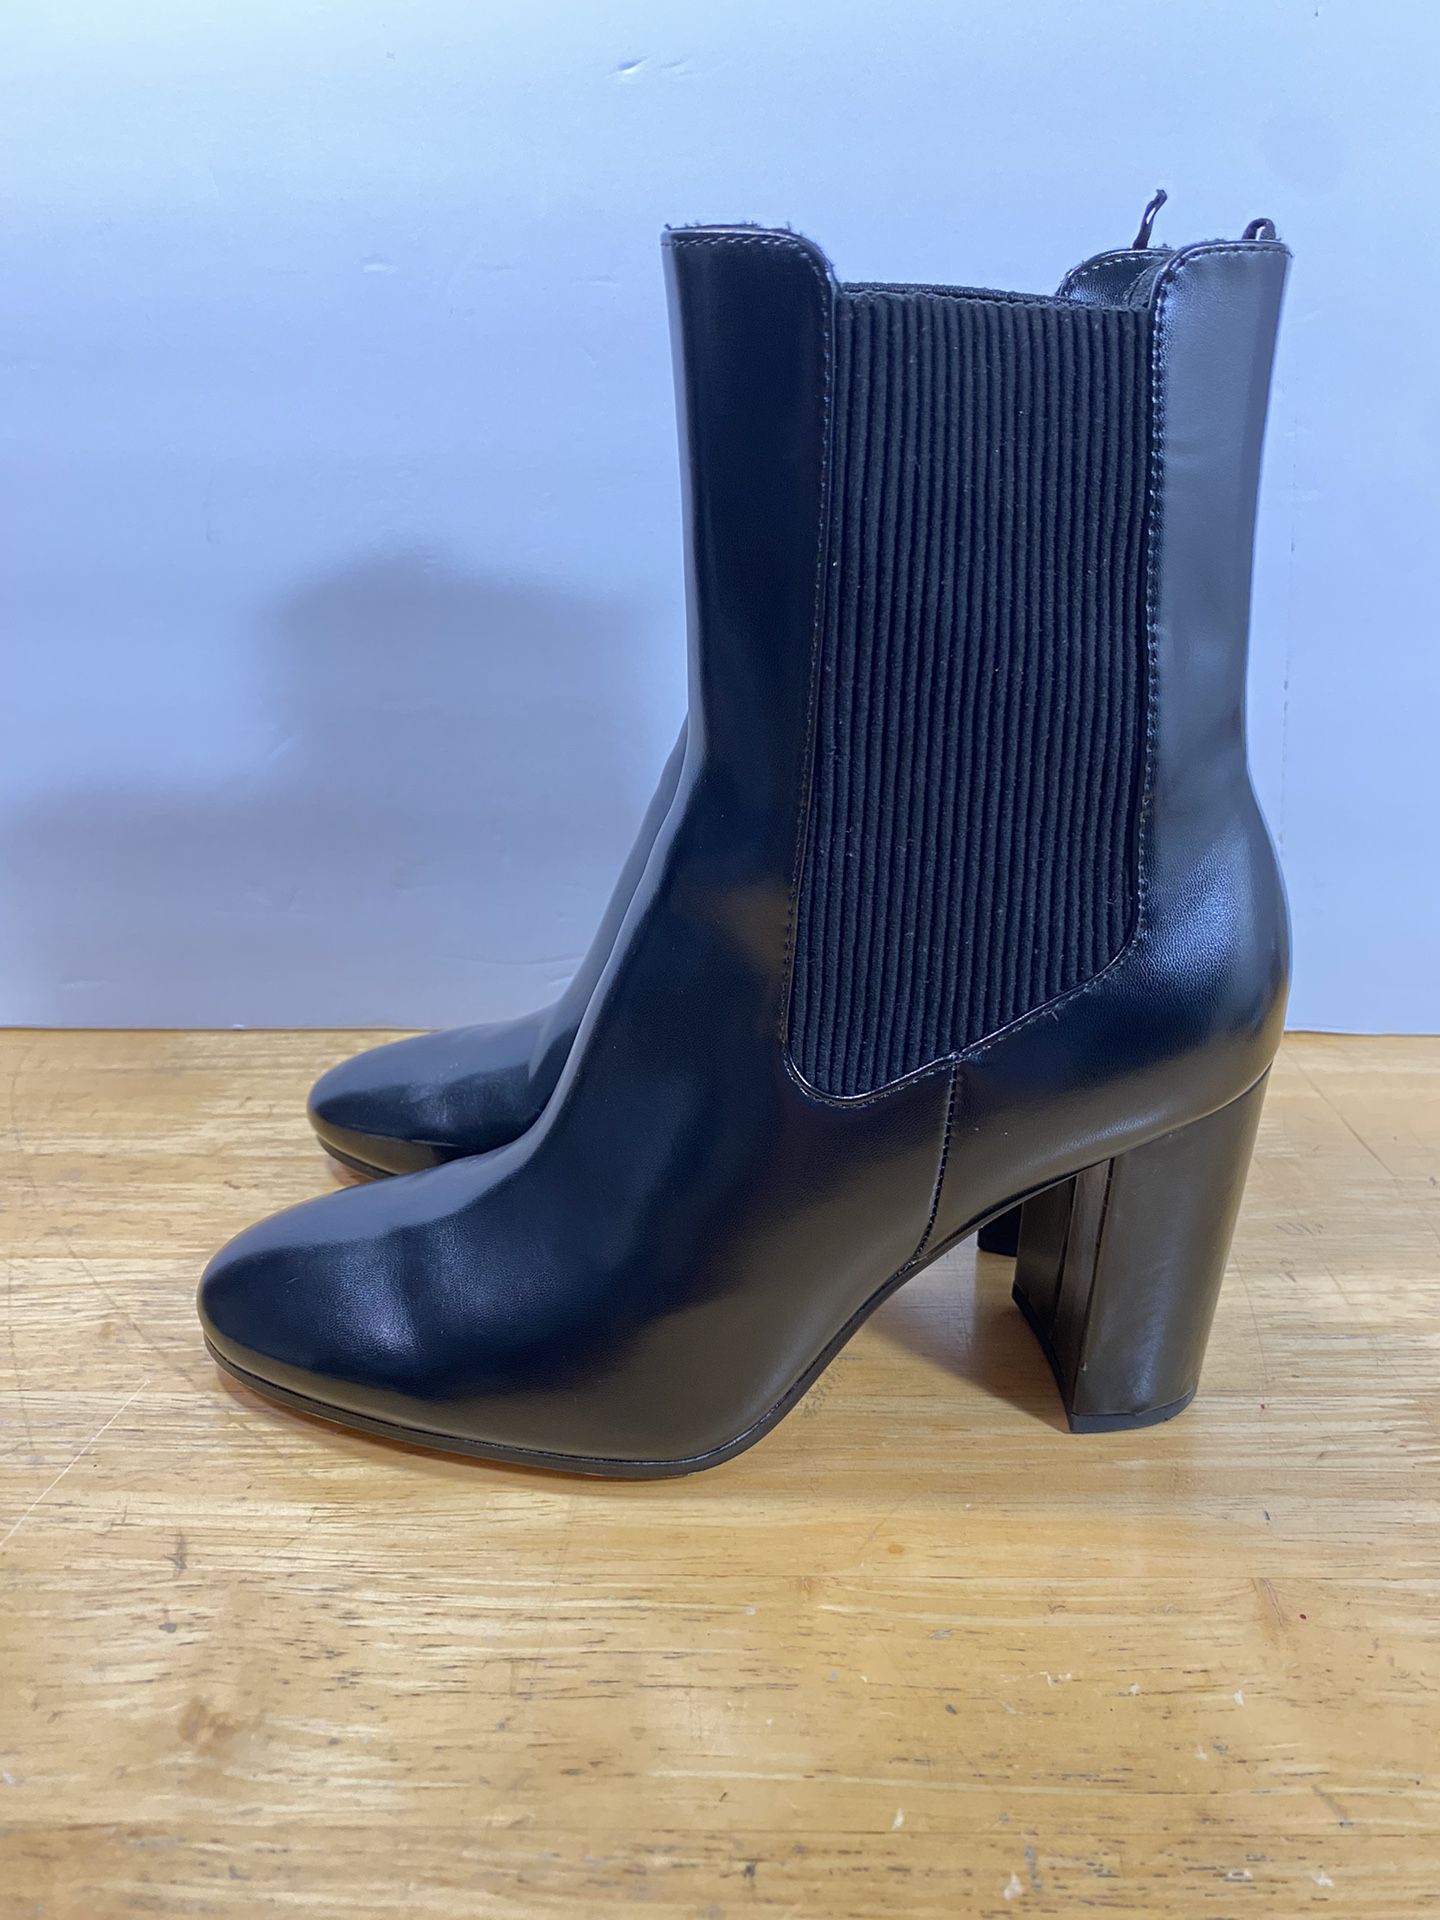 H&M Boots Womens 39 Size 8 Chelsea Black Block Heels Round Toe Casual Comfort